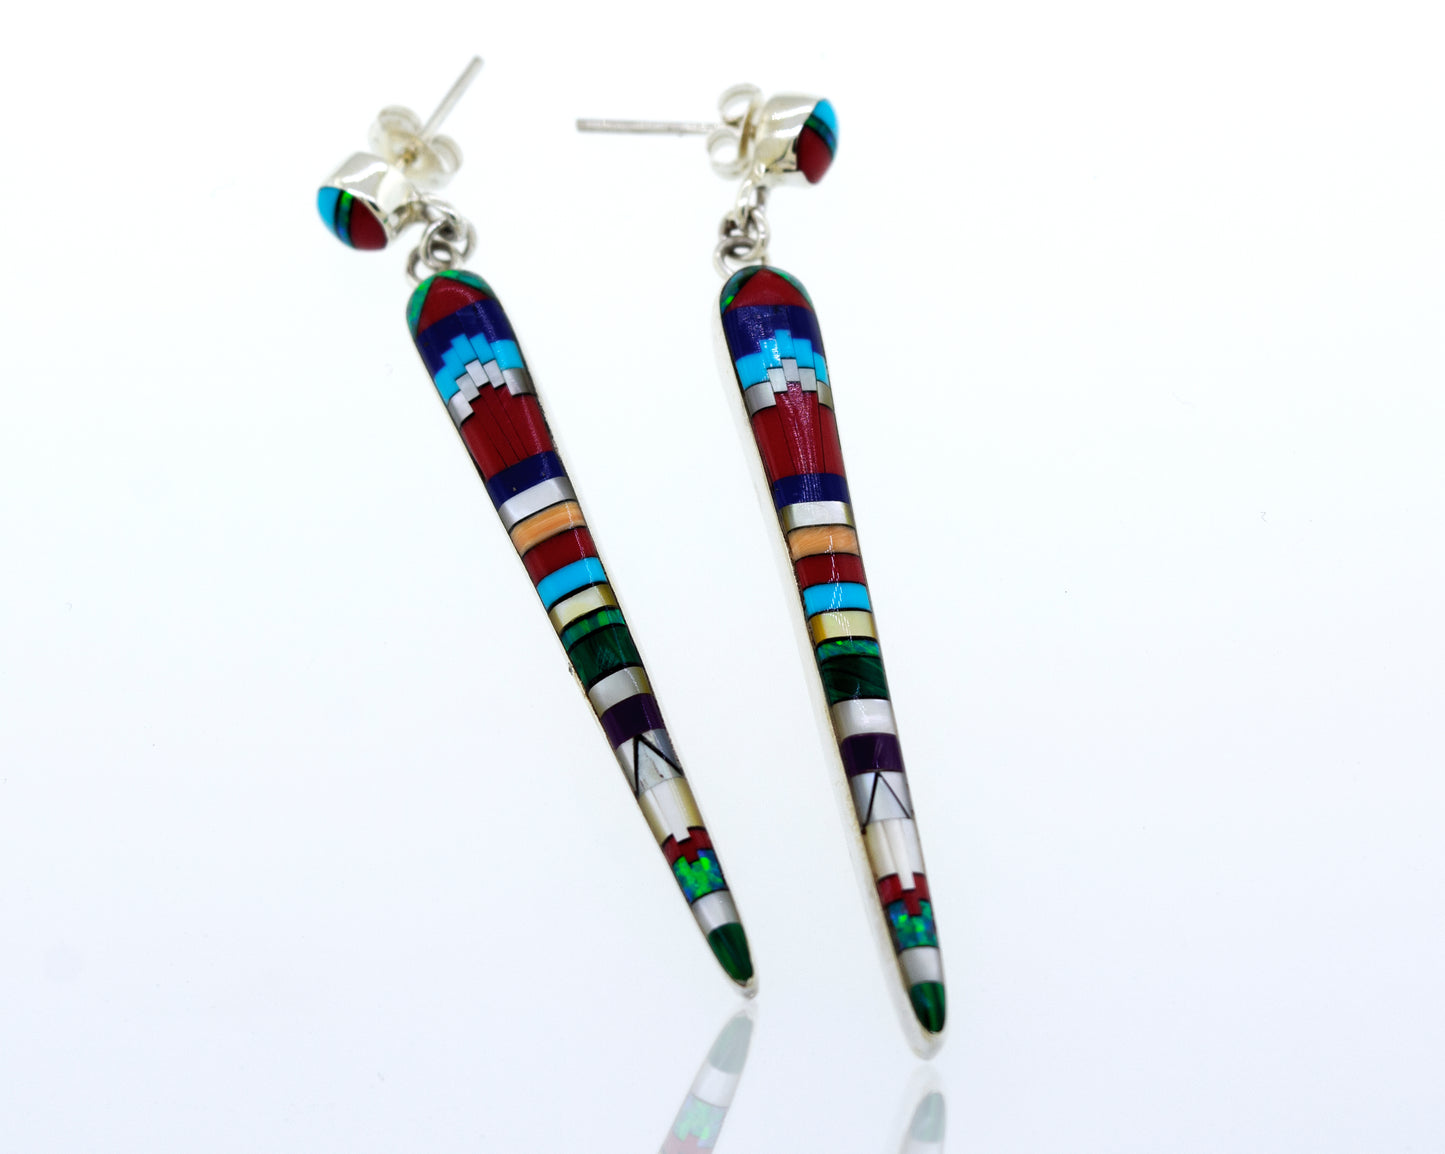 A pair of Super Silver Beautiful Designer Multi-Stone Elongated Teardrop Earrings with colorful inlaid details, crafted from sterling silver, resting on a white surface.